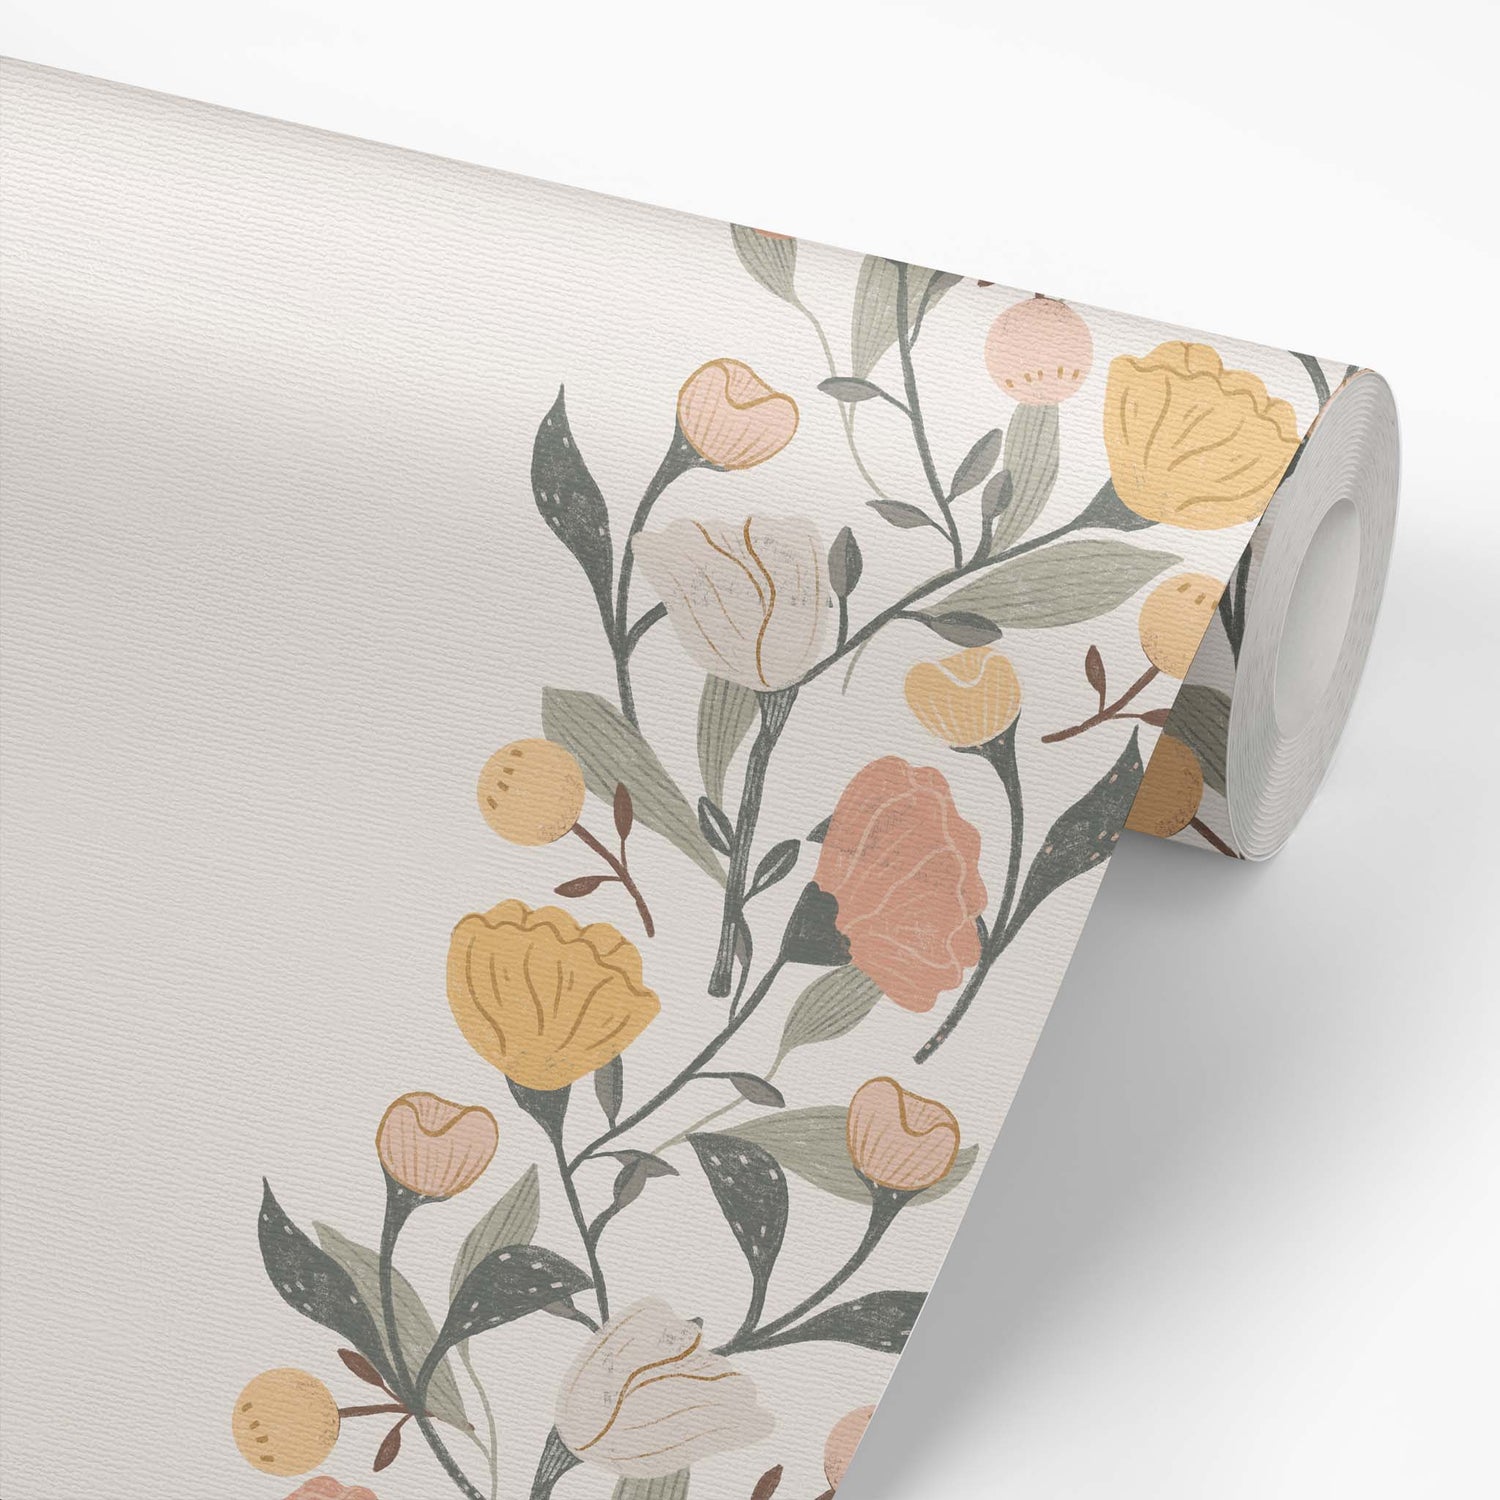 Wallpaper roll preview of this Floral Stripe Wallpaper in Neutral by artist Brenda Bird for Ayara.